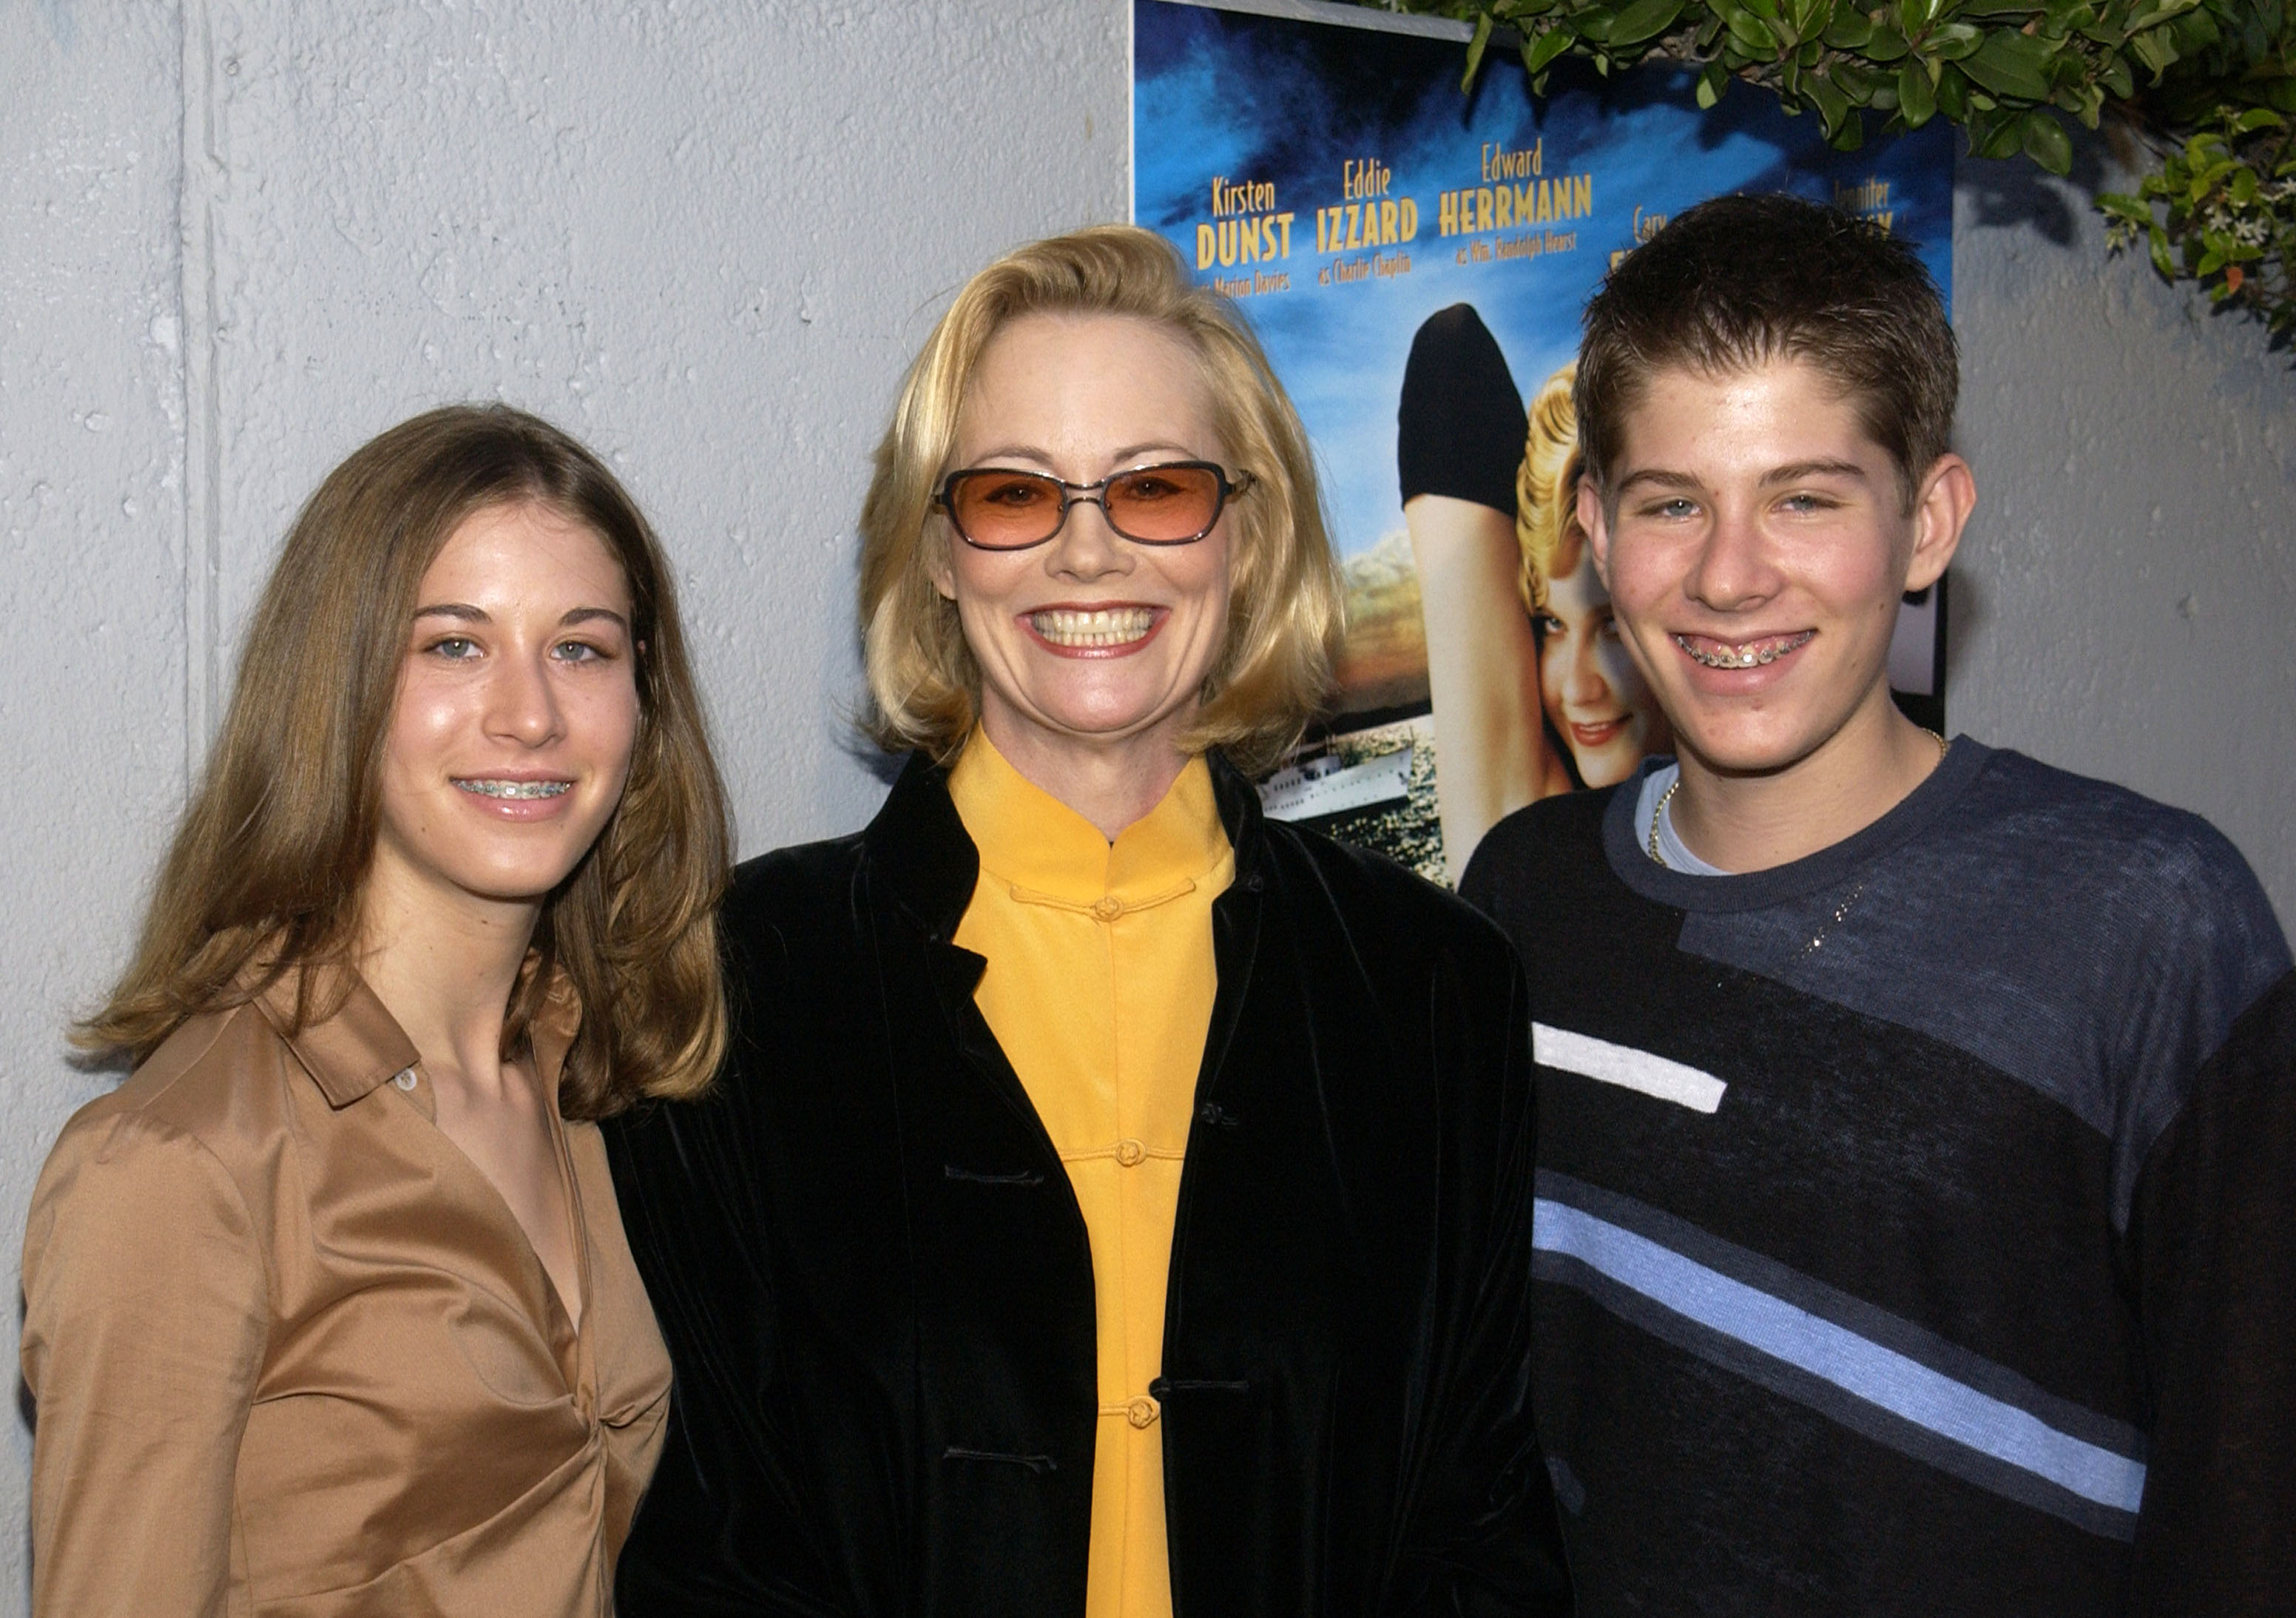 Cybill Shepherd, her twin children Ariel and Zachariah Oppenheim during "The Cat's Meow" premiere at Harmony Gold on April 11, 2002, in Hollywood, California. | Source: Getty Images